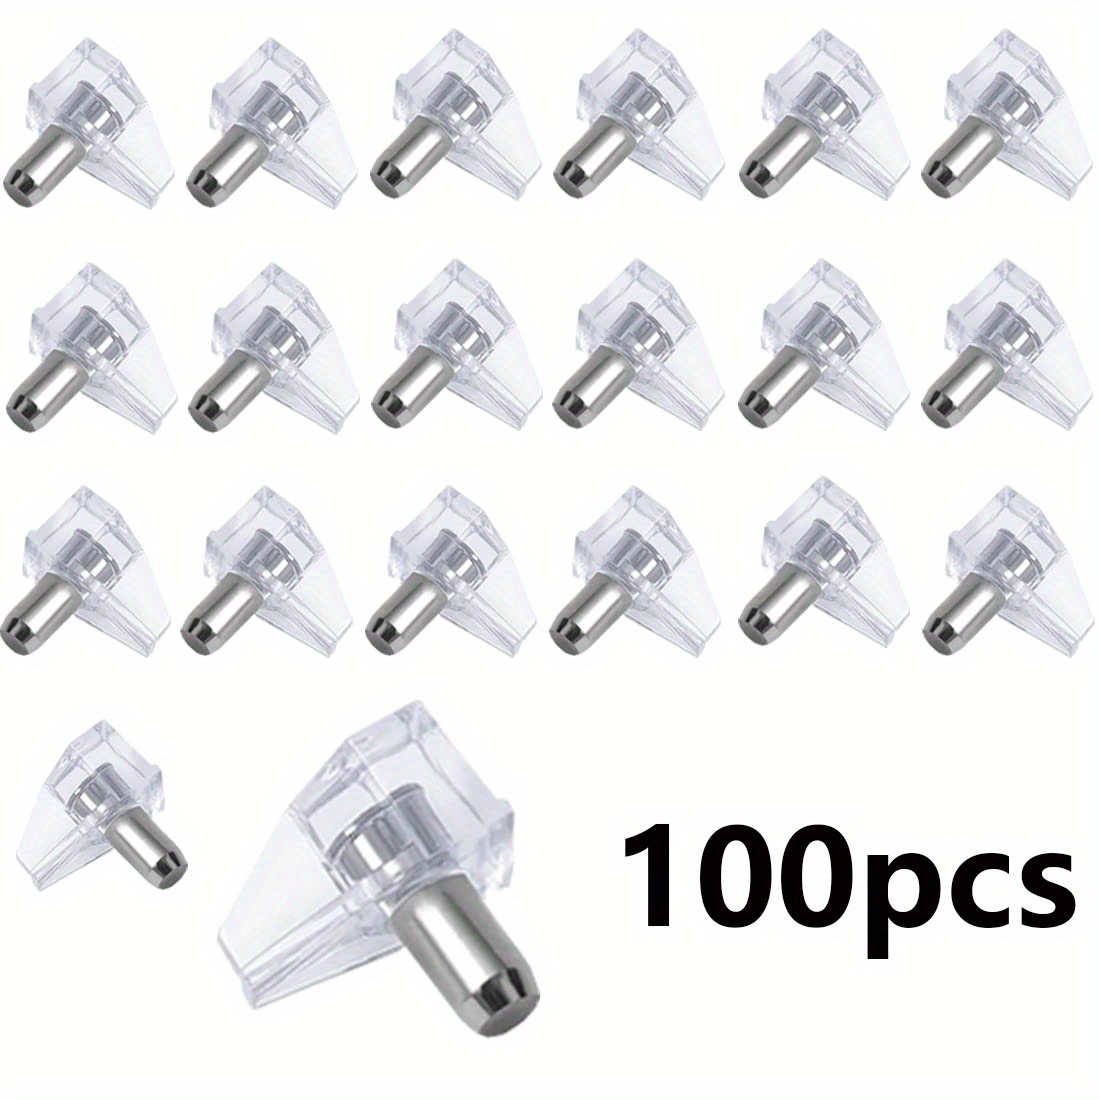 30 50 100pcs 5 millimeters shelf support peg support cabinet shelf pins clear plastic replacement peg cabinet shelf supports pins for kitchen furniture book shelves shelf holder locking pins